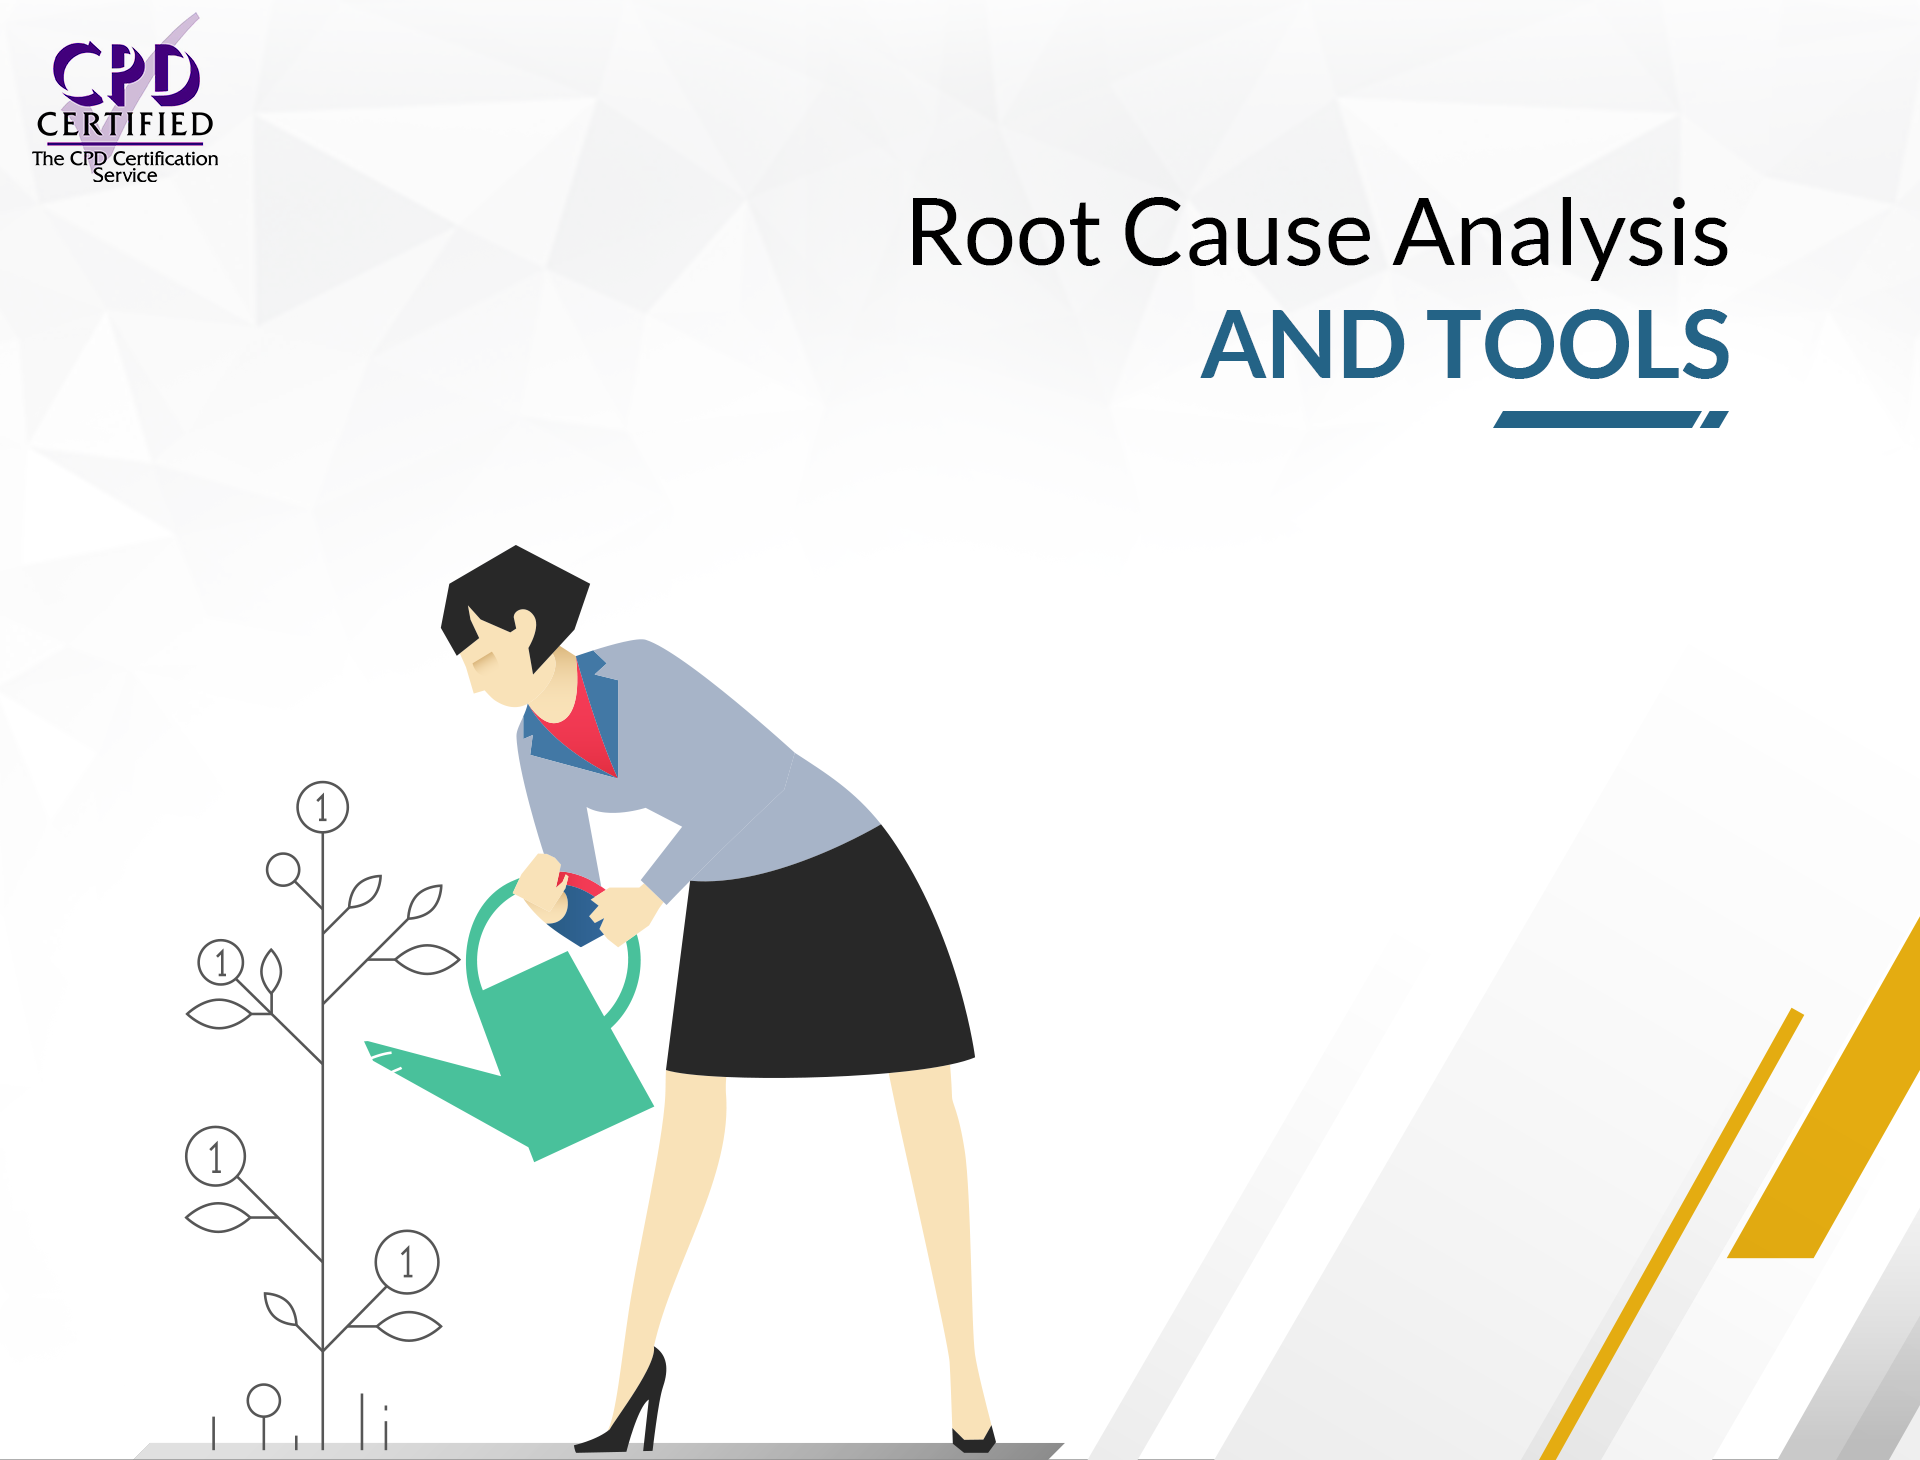 Root Cause Analysis and Tools